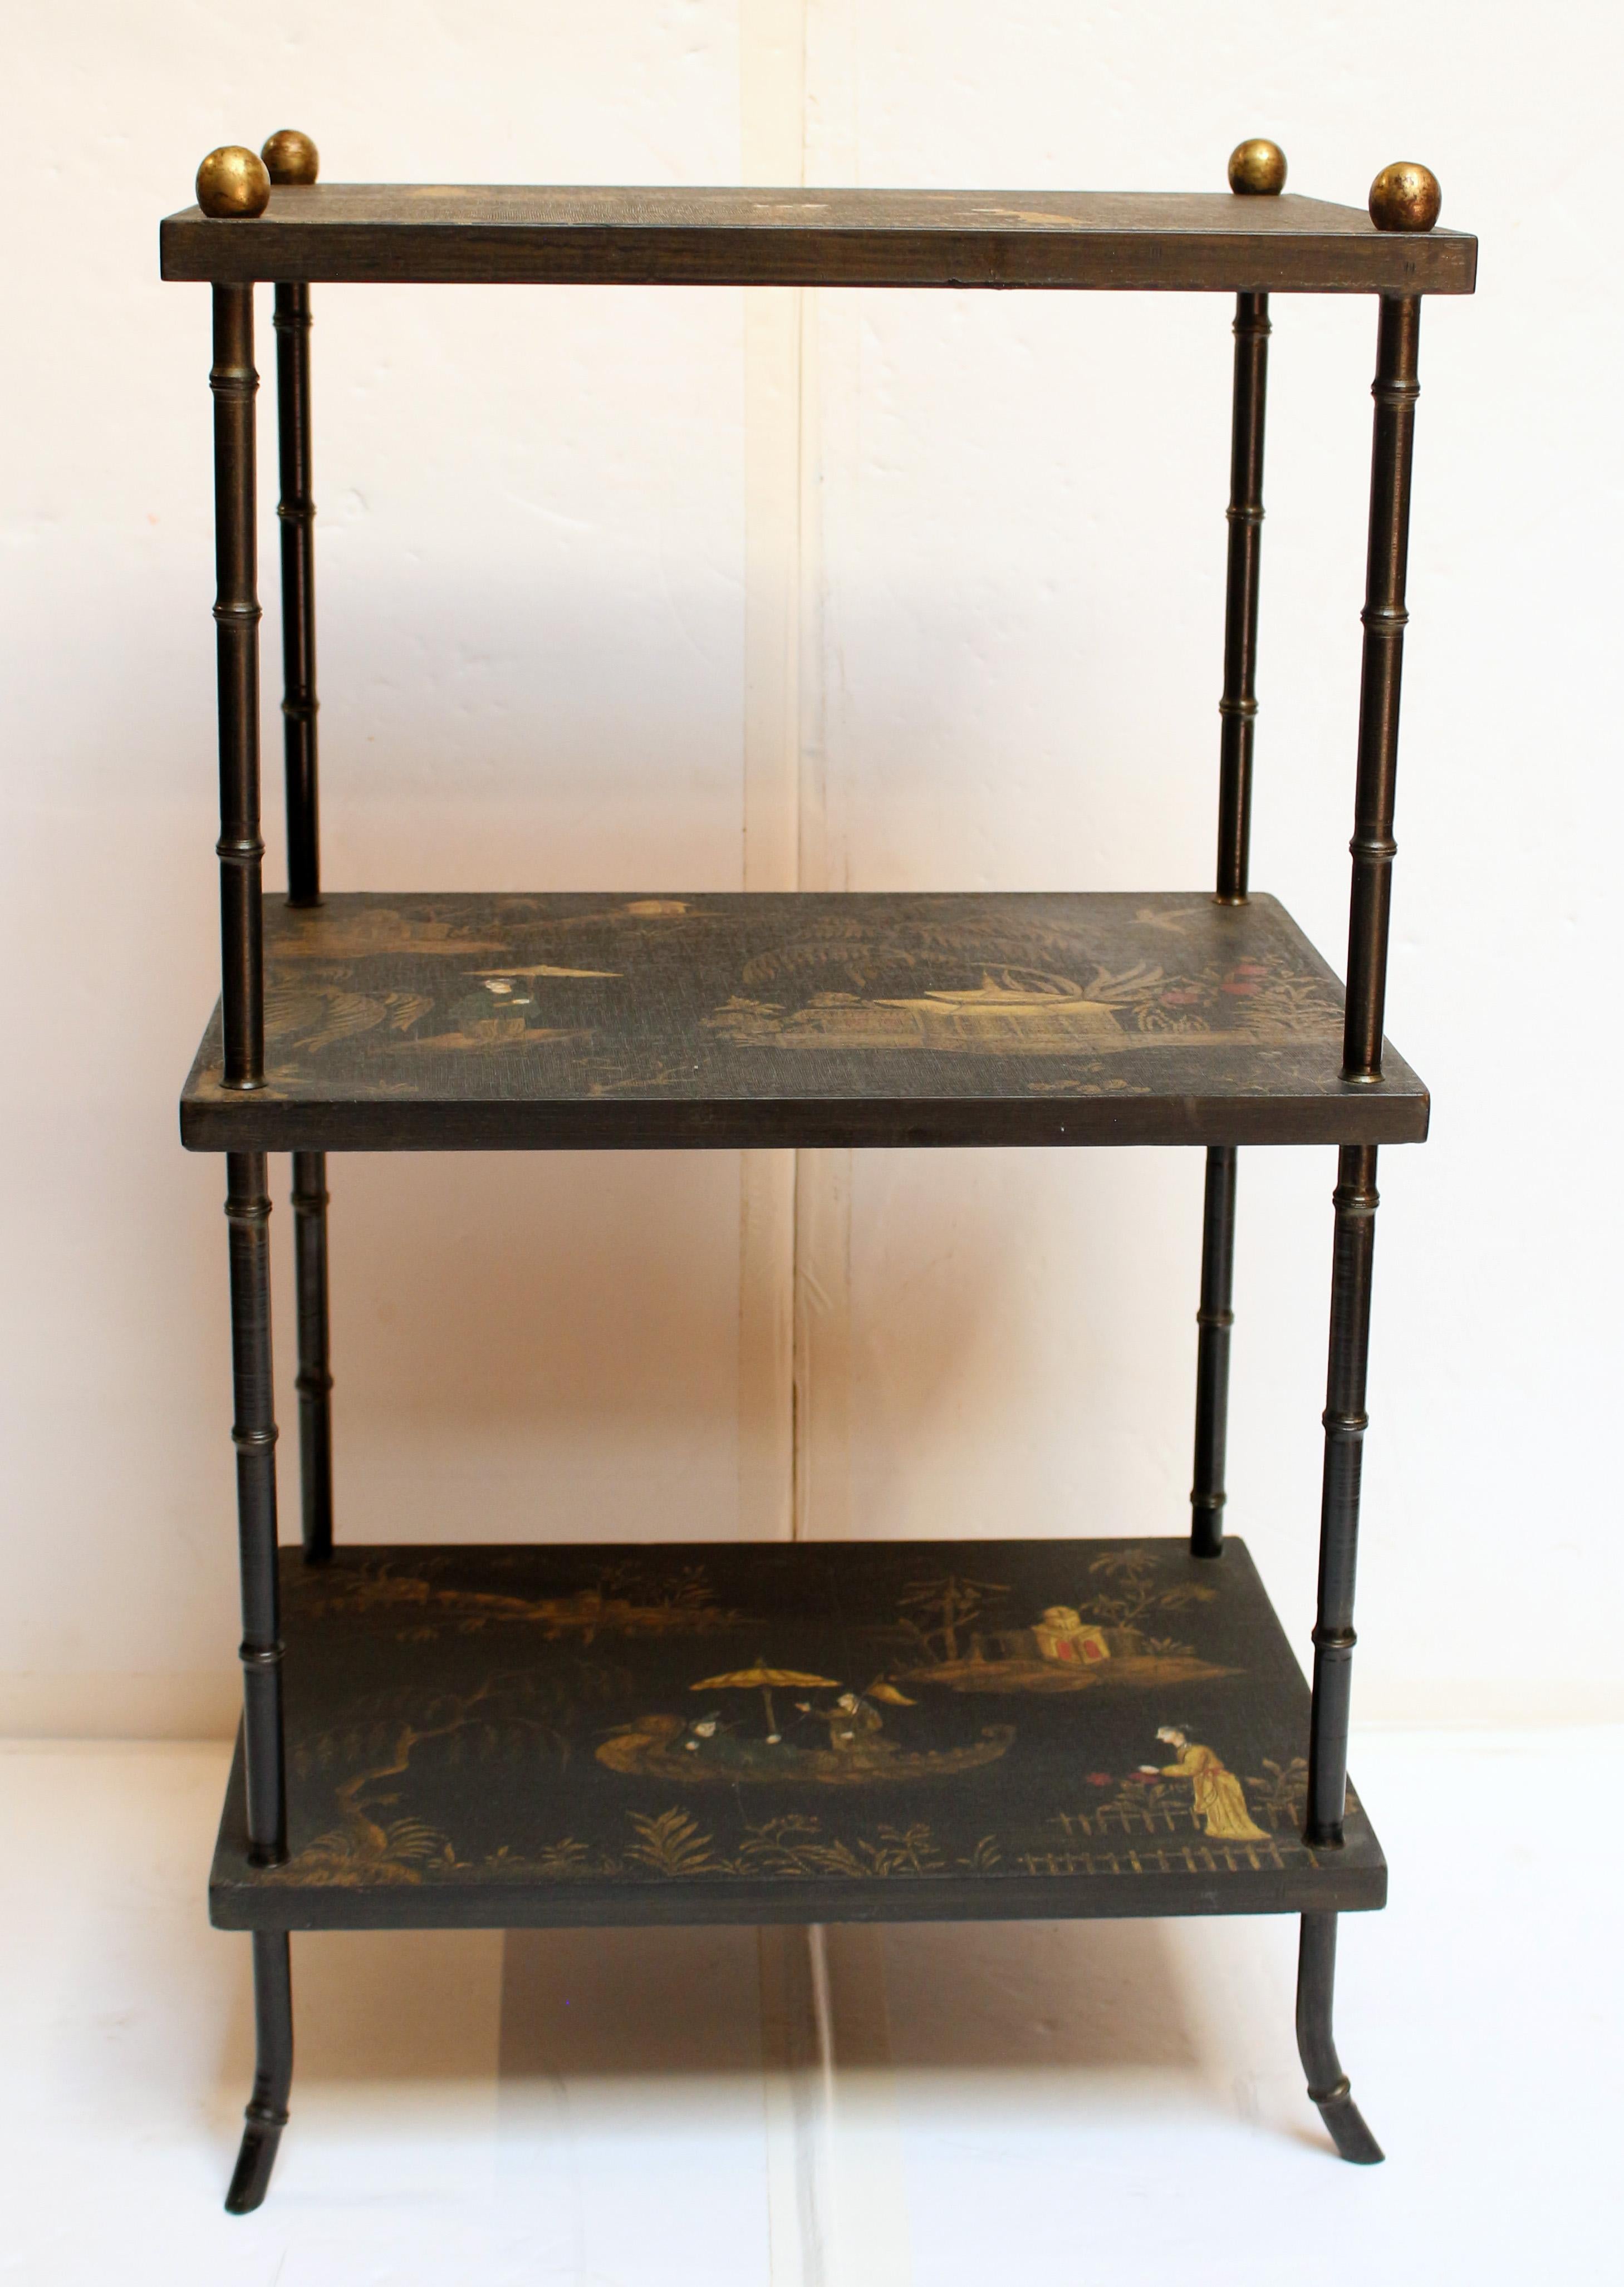 Circa 1920 Art Deco 3-tier side table. A very unique table, the surfaces of Chinoiserie decorated canvas wrapped wood. Faux bamboo painted metal uprights with gilt knob tops.
16